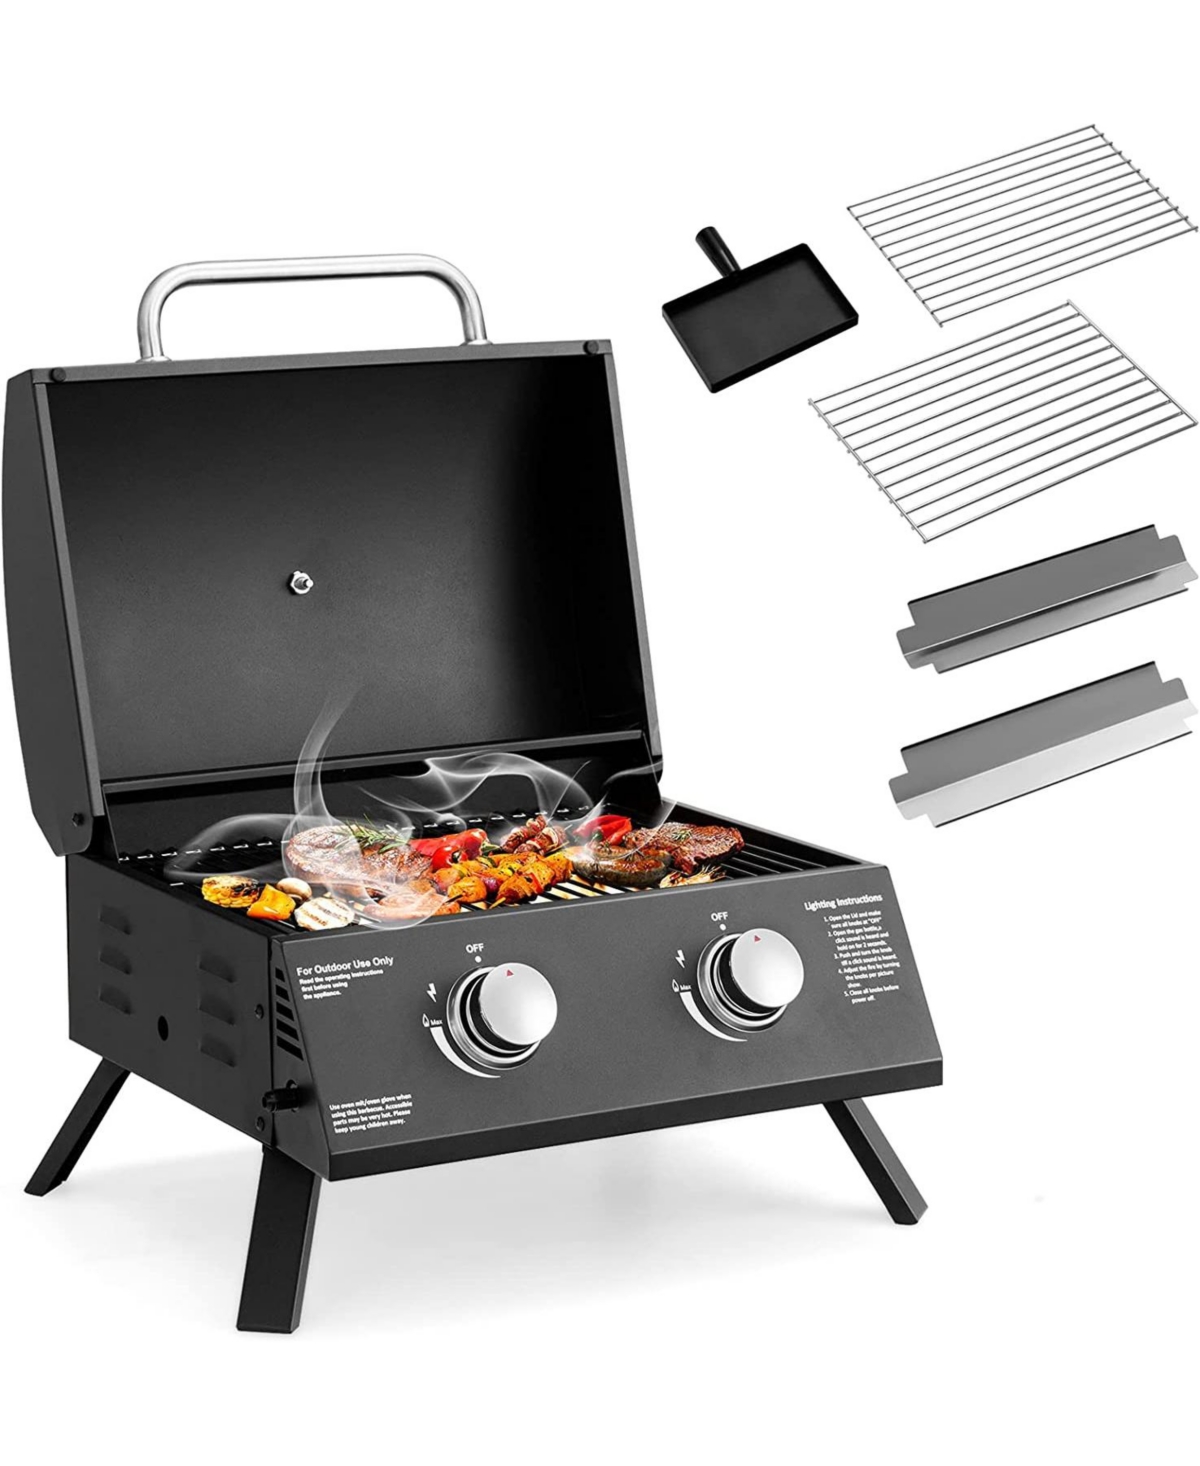 Stainless steel Propane 20000 Btu Gas Grill - Silver